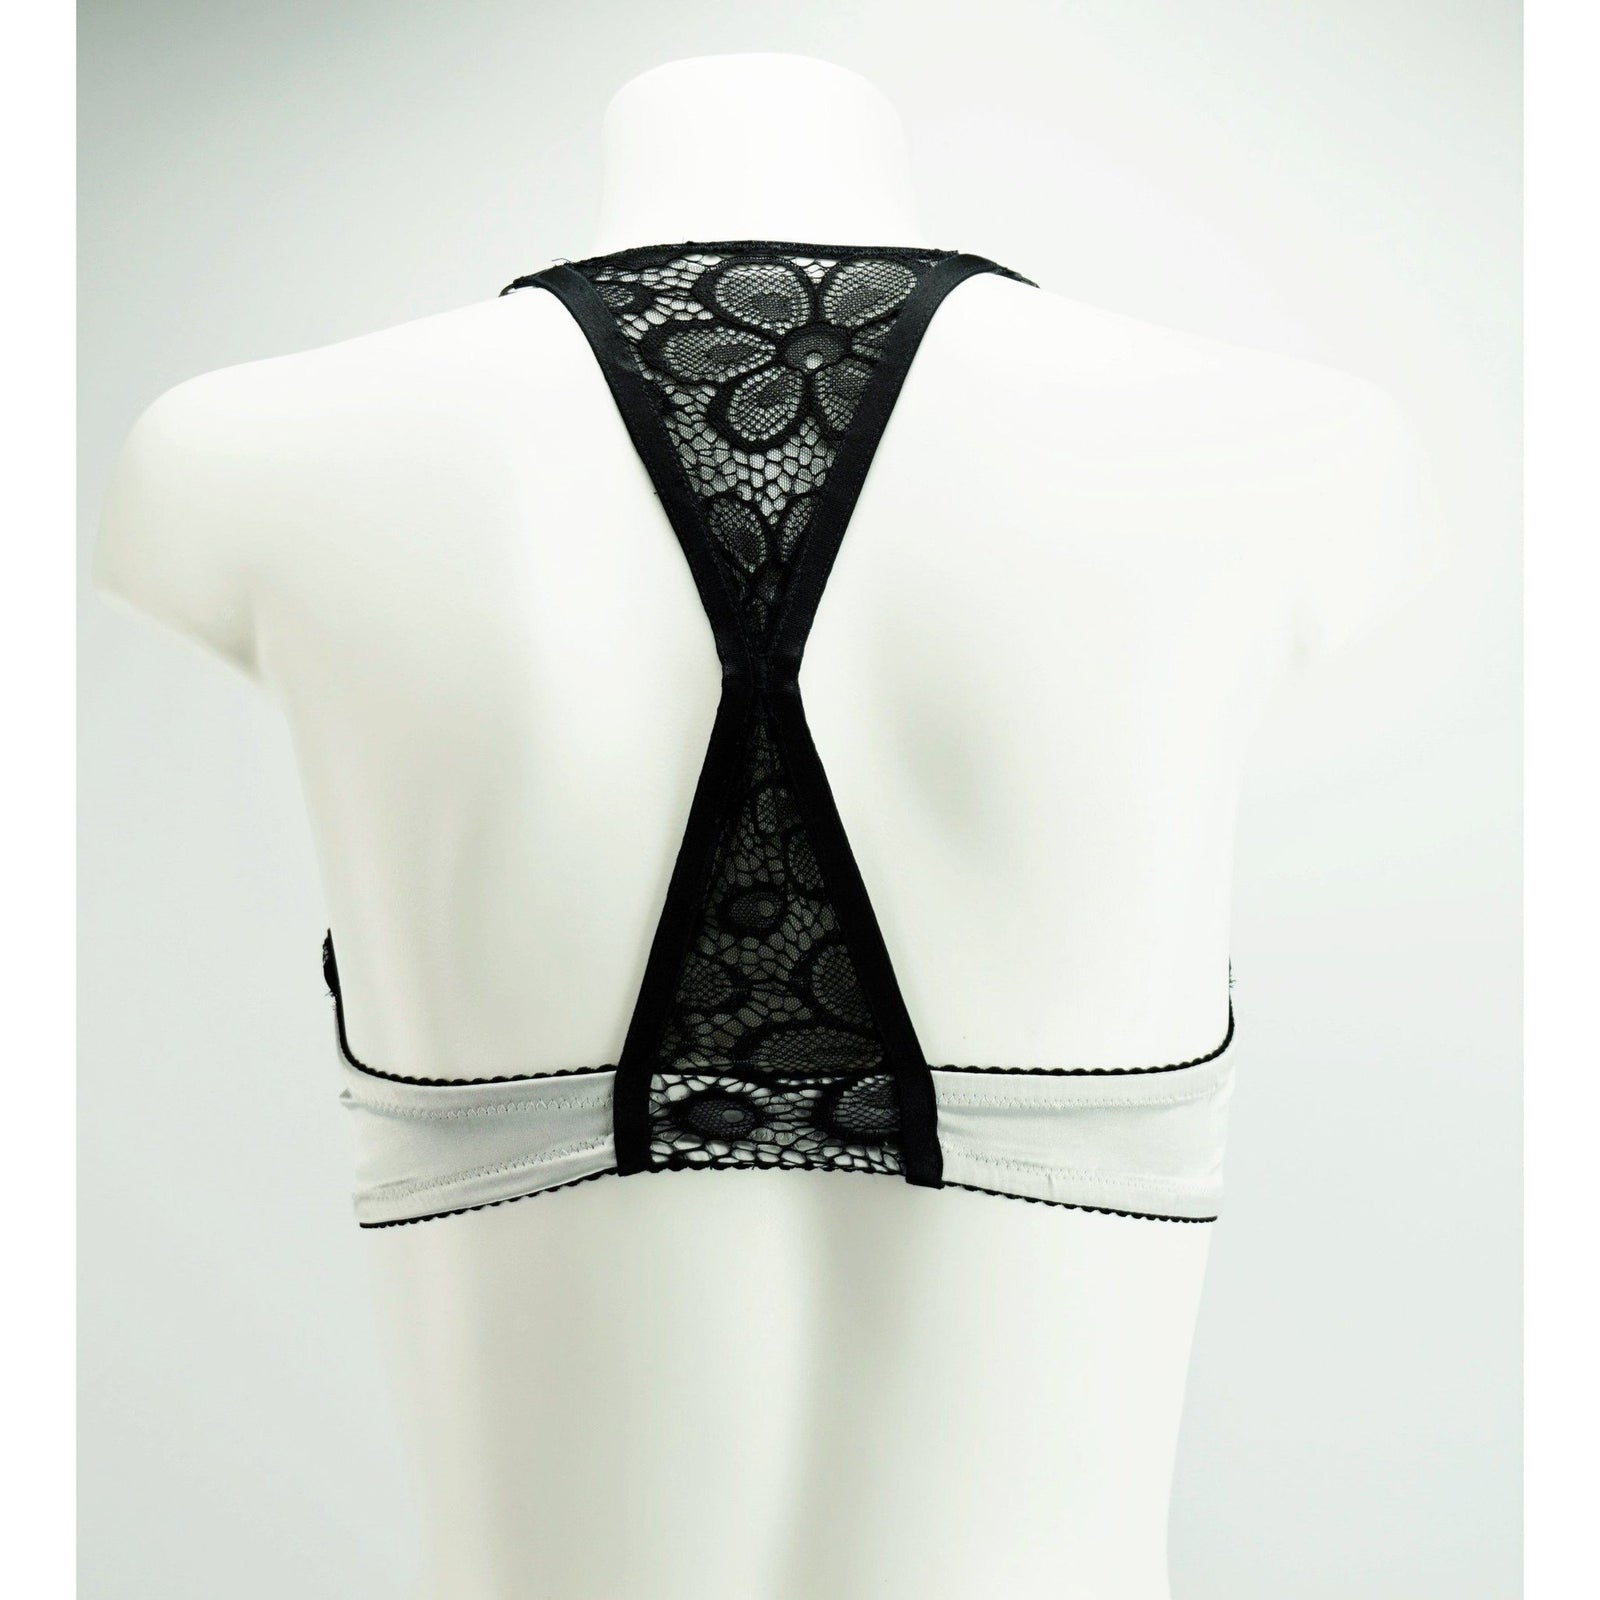 Lingerie Set - Priscilla Kai Tailor Bra Mikayla Saleem Thong In Black/White With Floral Lace Overlay